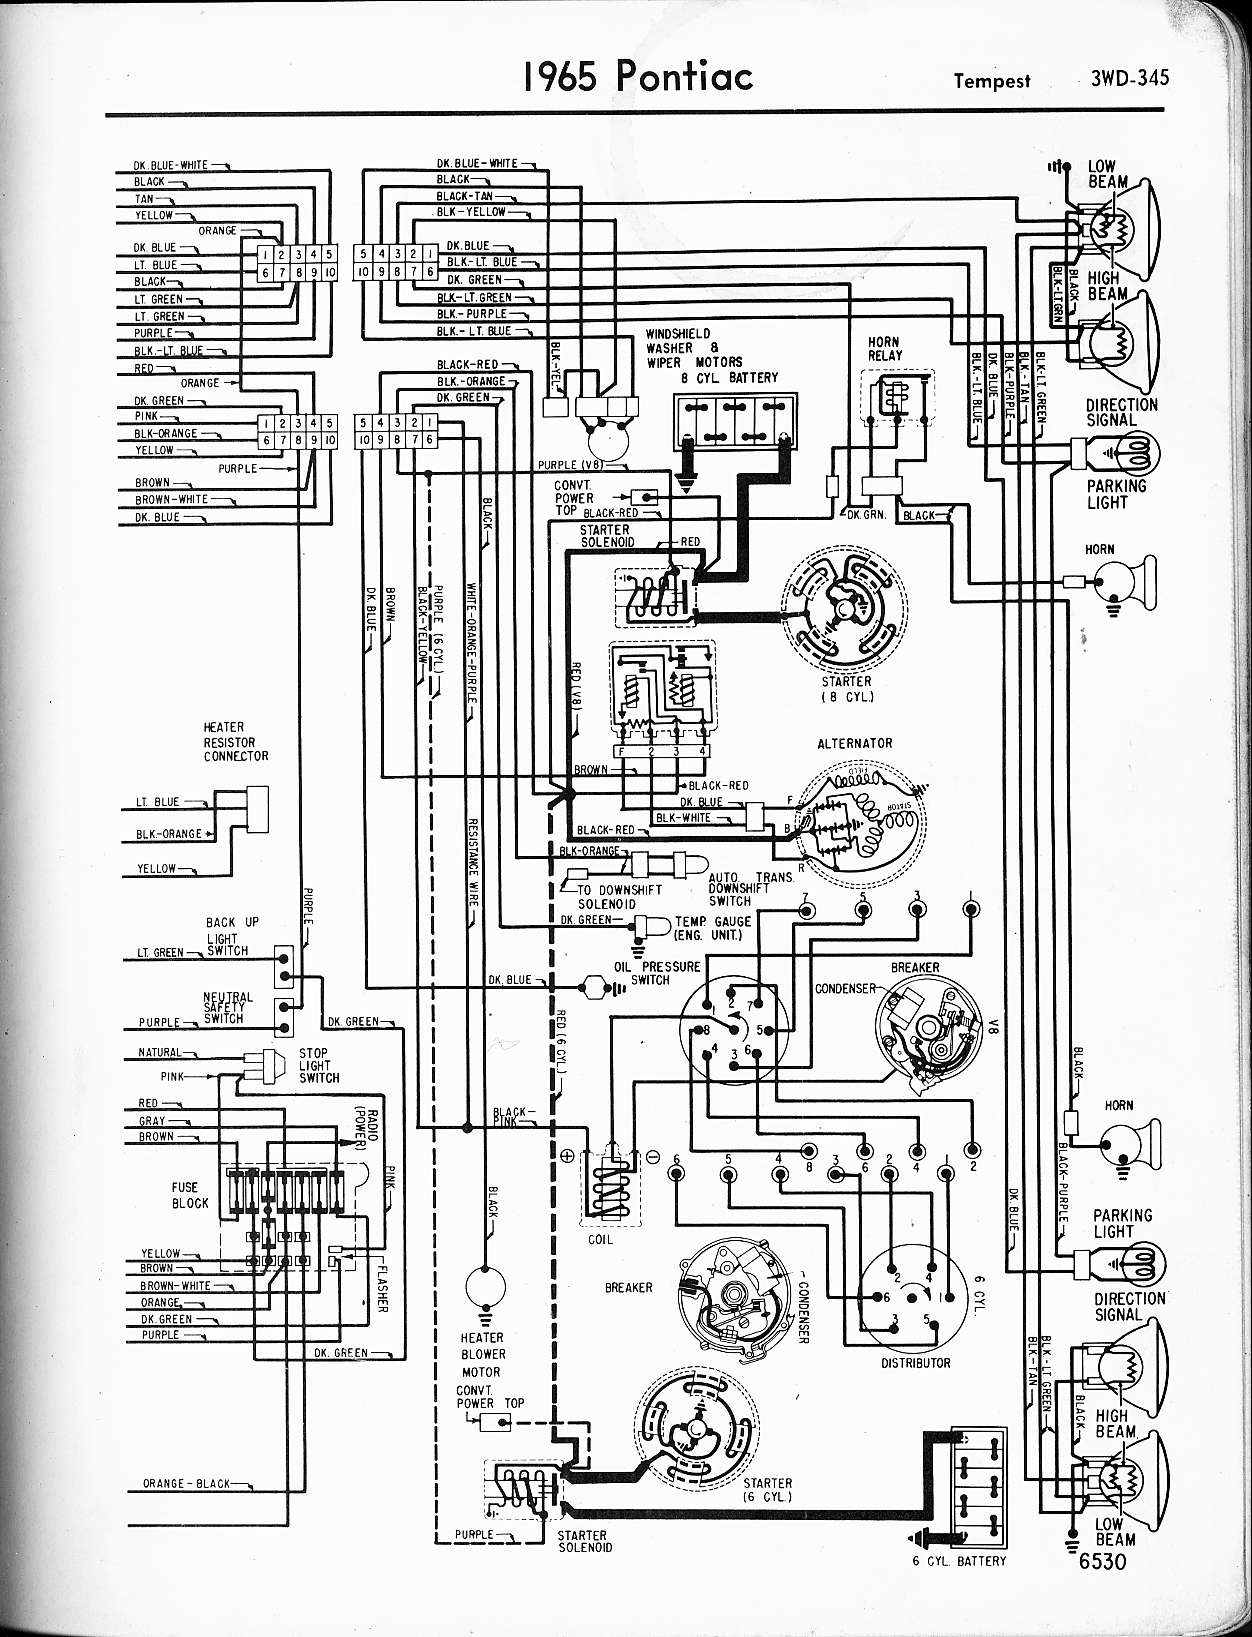 1995 Mercedes S420 Wiring Diagram from www.oldcarmanualproject.com